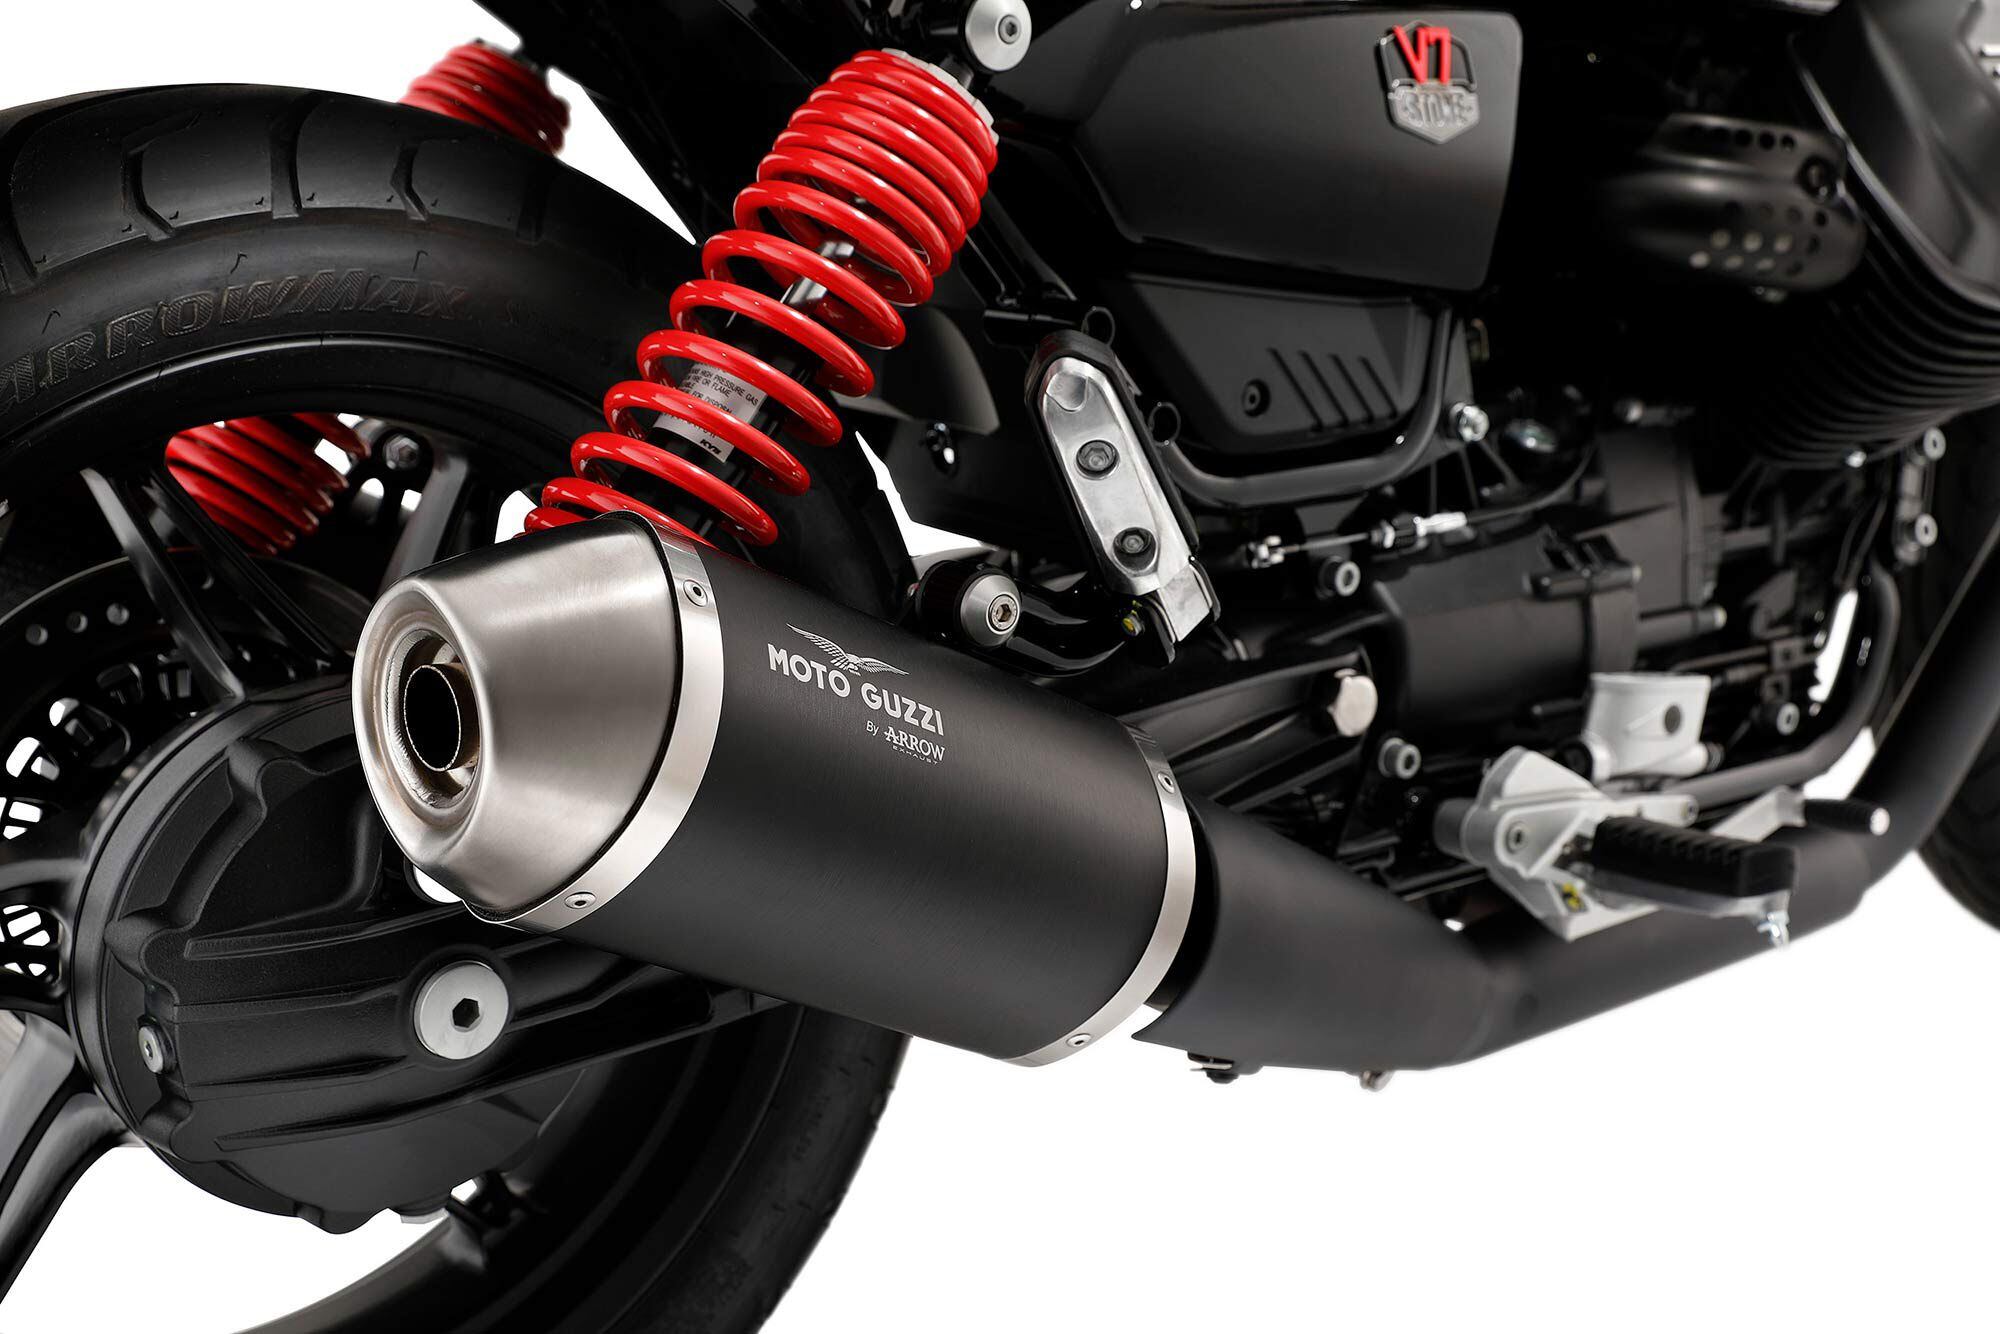 Red damper springs also add some color to the rear end, but the V7 Stone Special Edition's new Arrow exhaust is making the headlines.  The new pipe is said to increase power and torque.